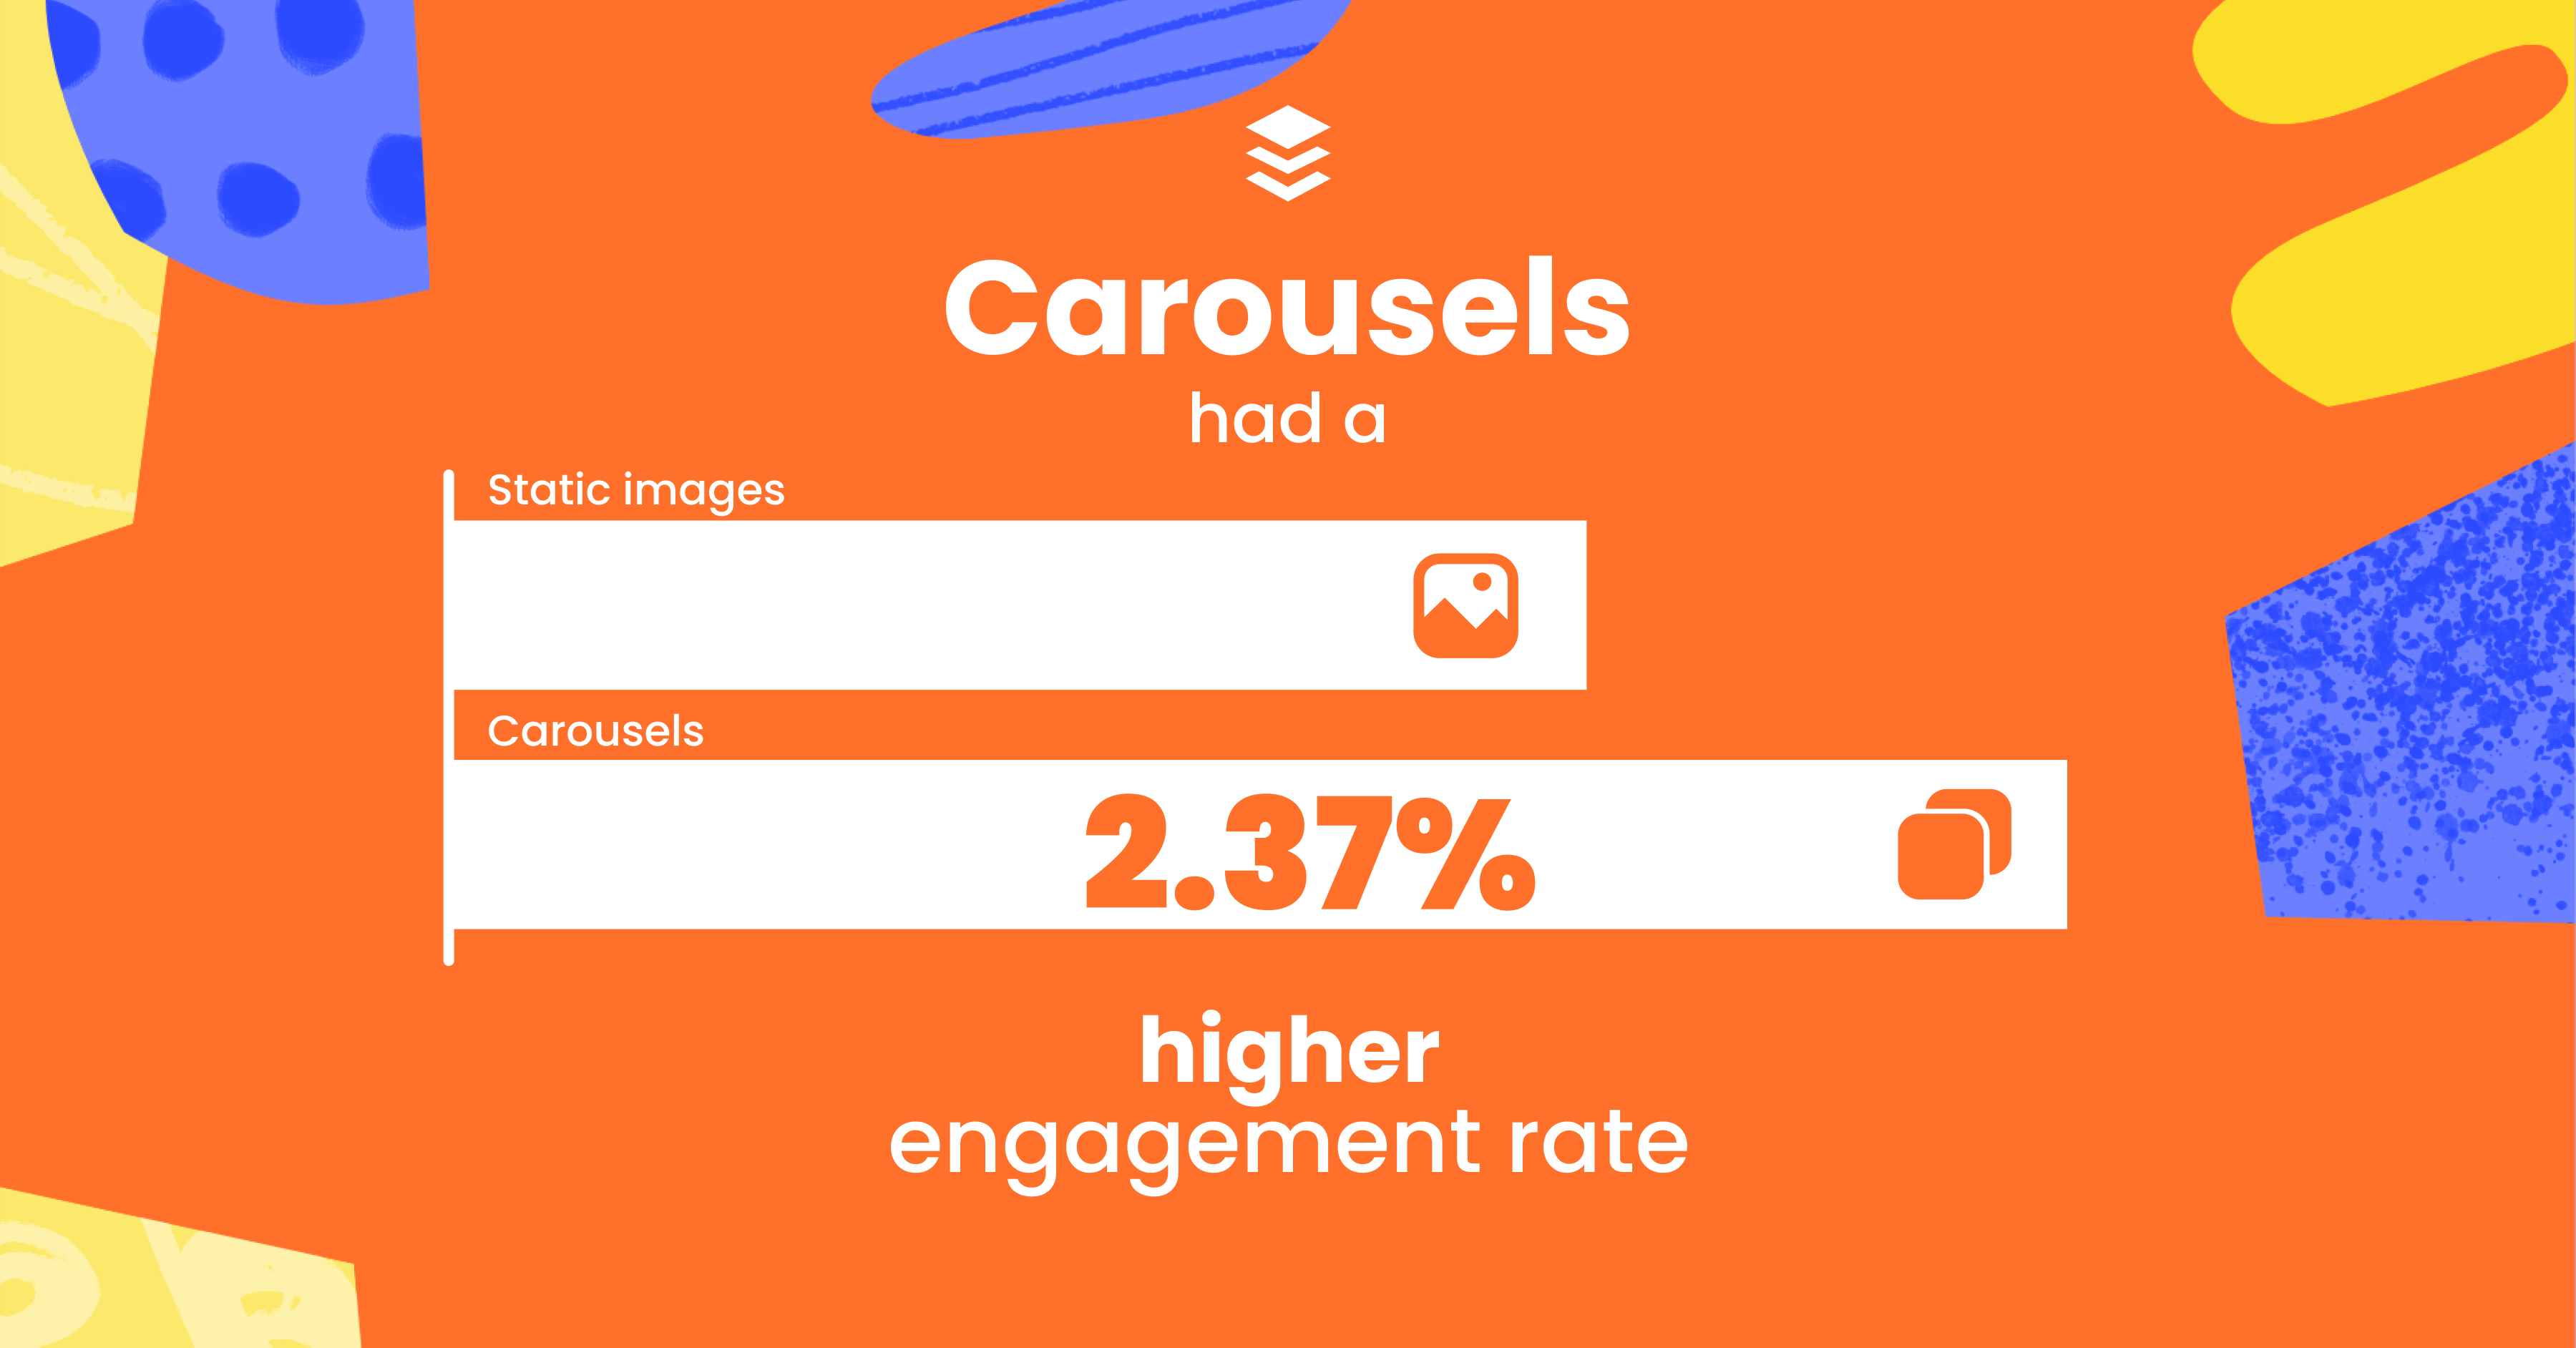 Instagram carousels have a 2.37% higher engagement rate